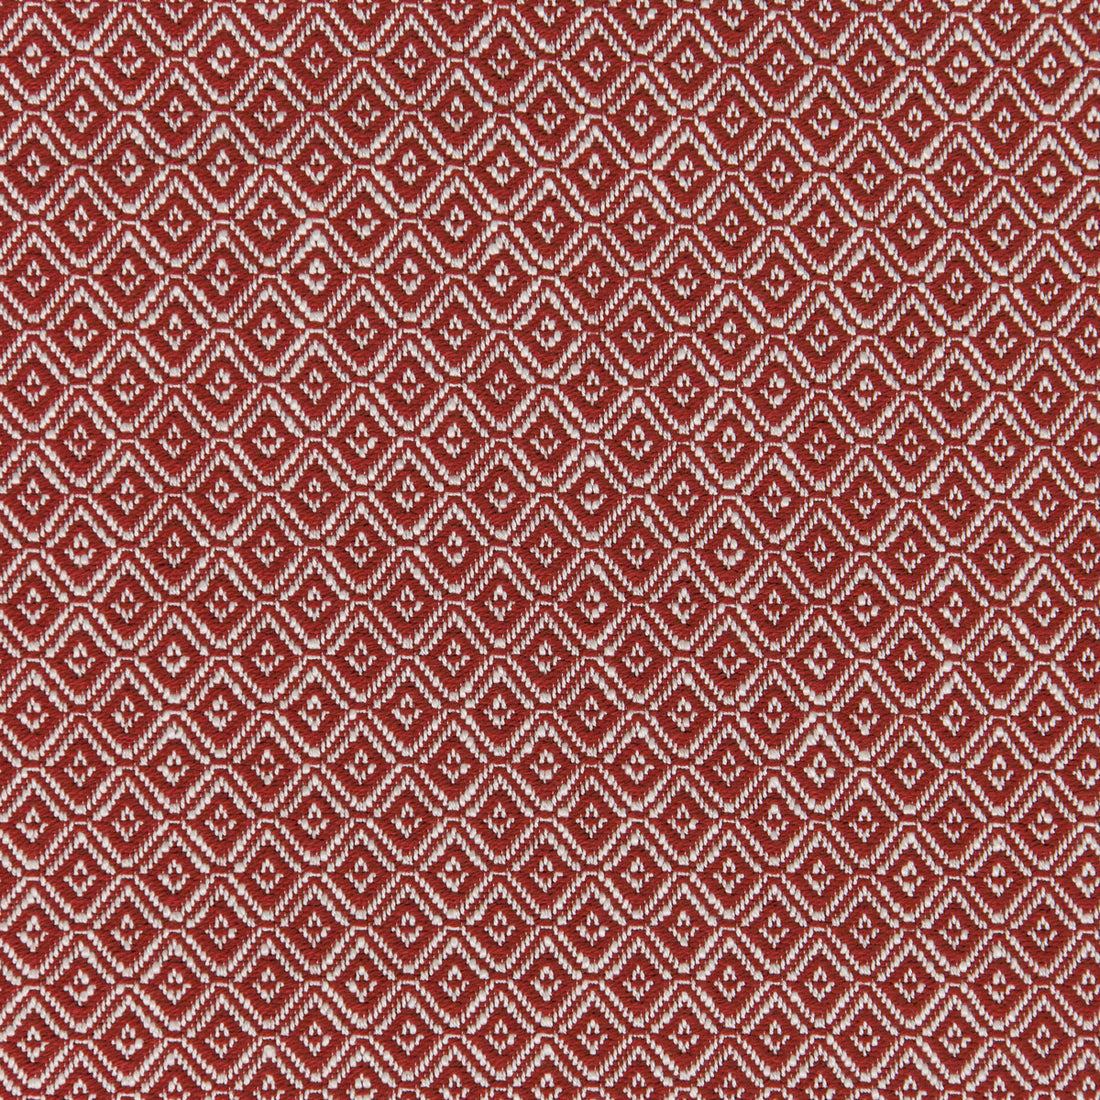 Seaford Weave fabric in brick color - pattern 2020106.919.0 - by Lee Jofa in the Linford Weaves collection